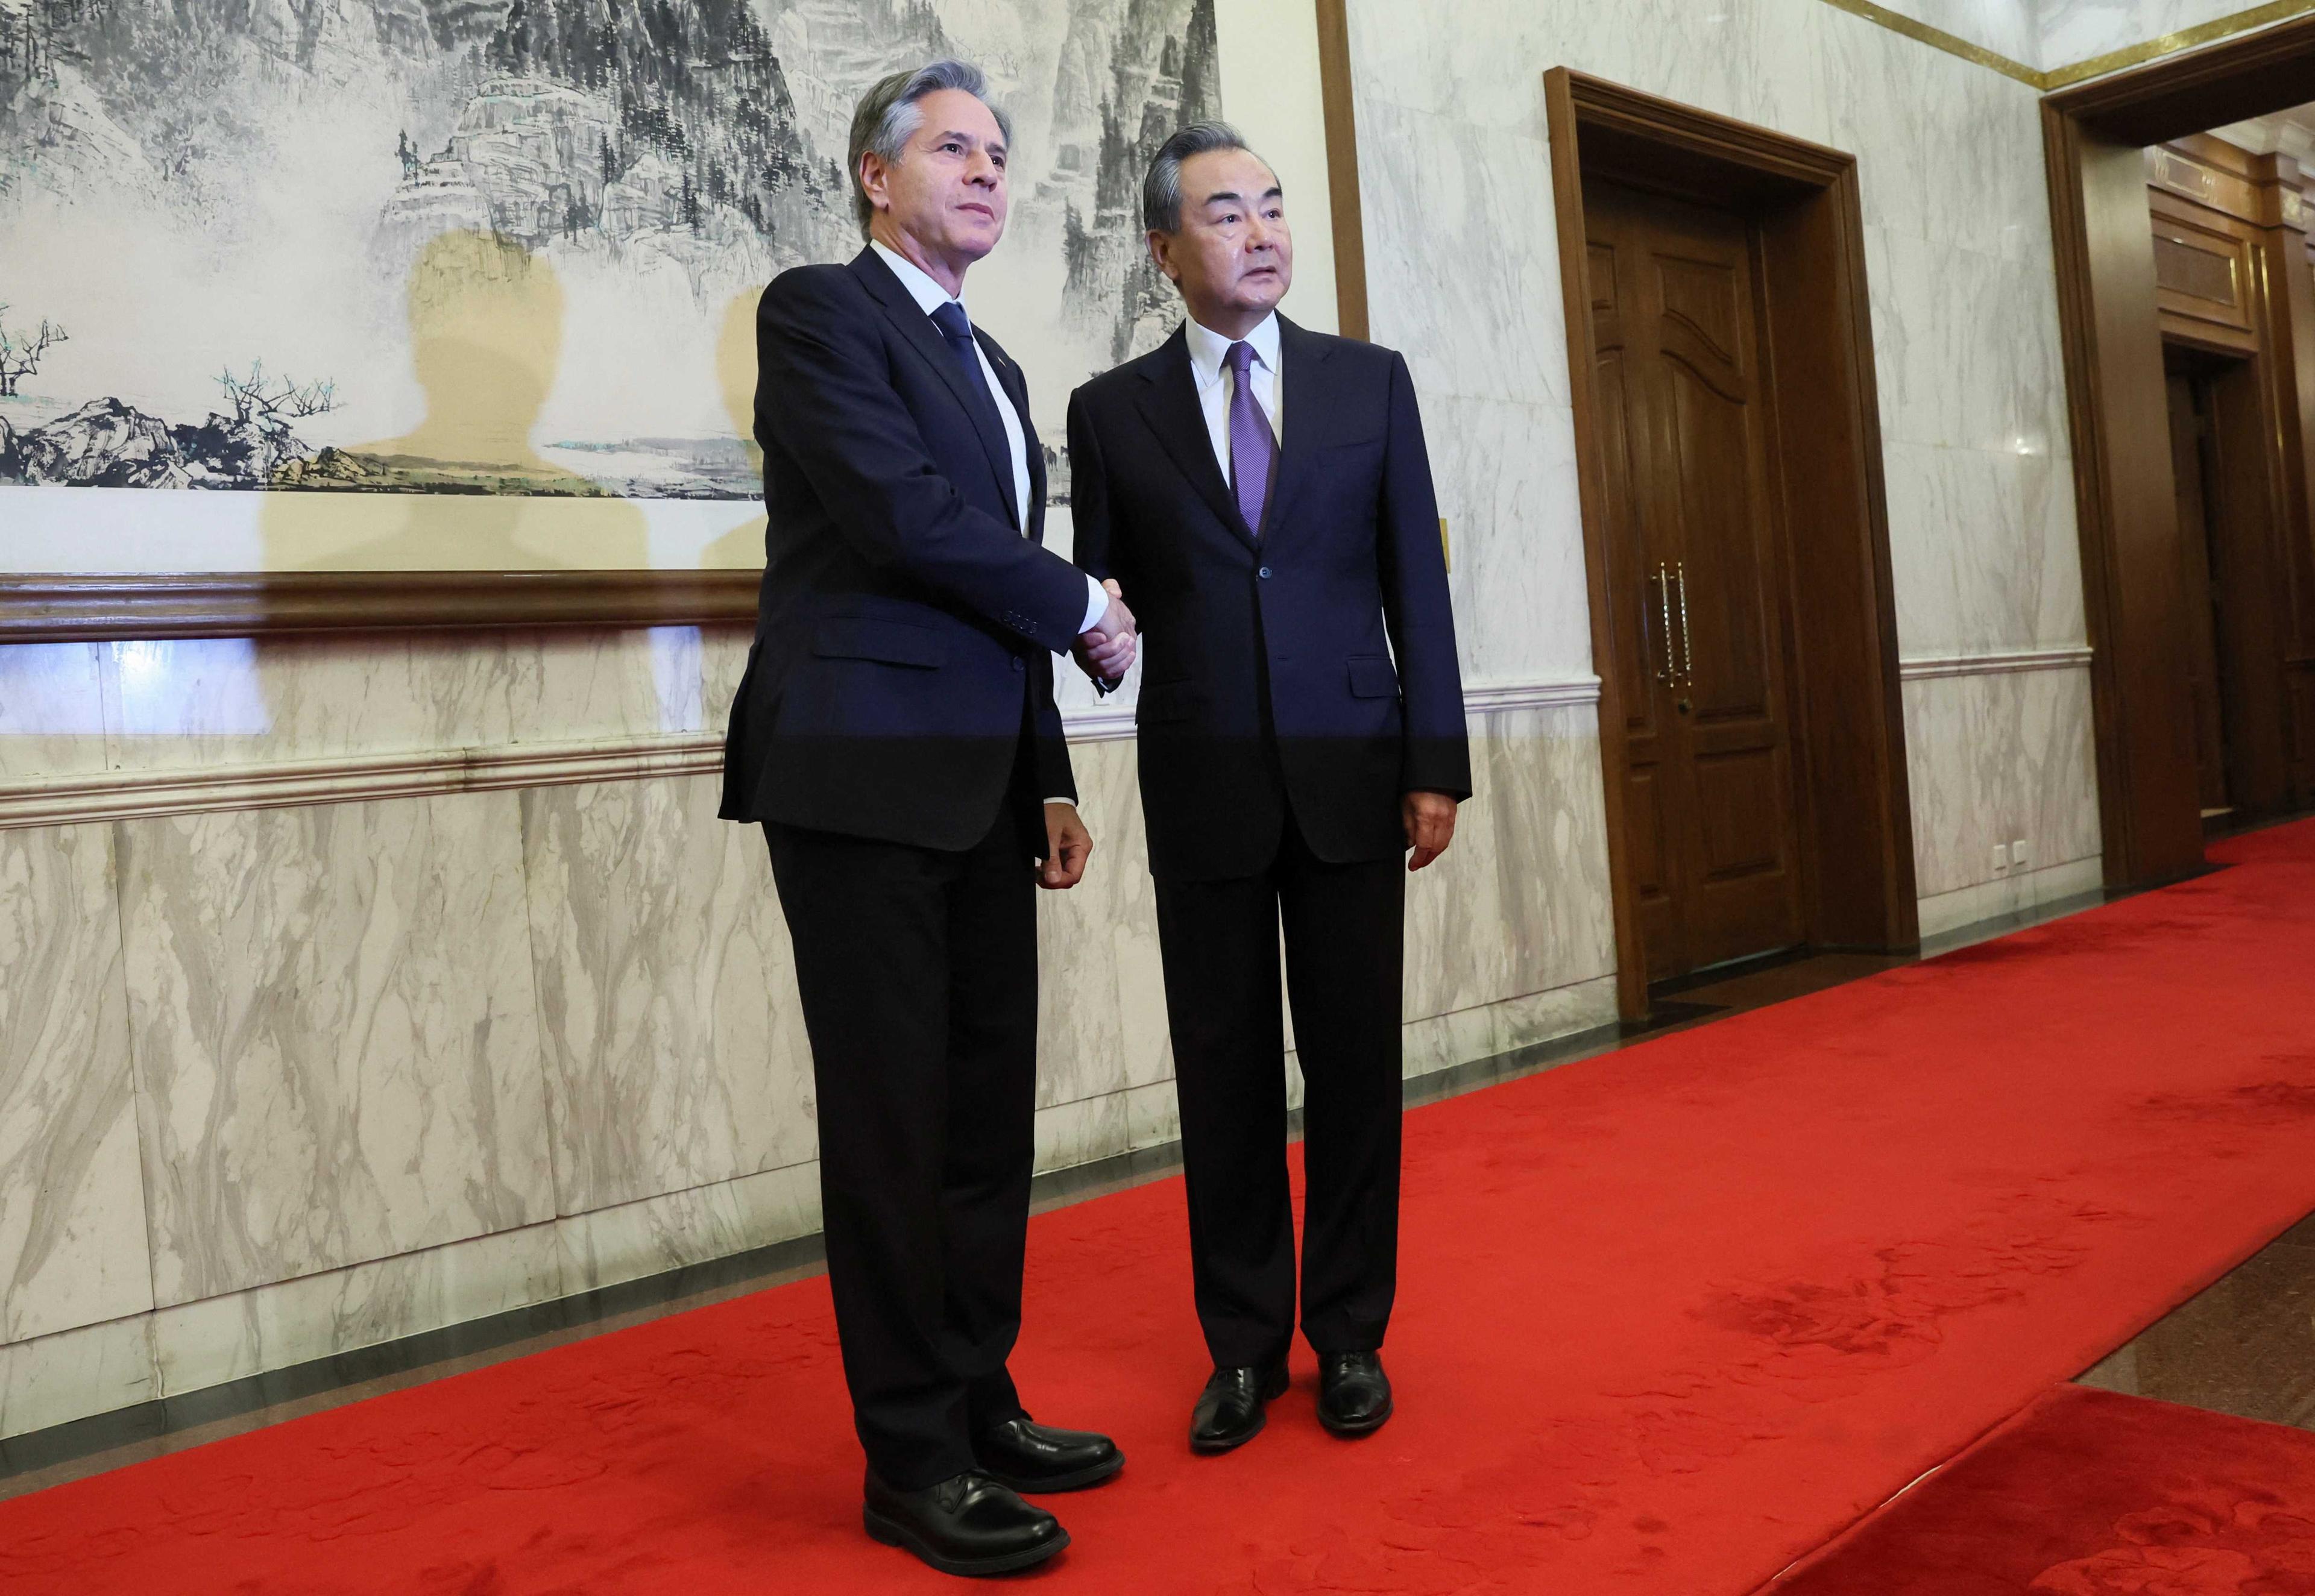 US Secretary of State Antony Blinken shakes hands with China's Director of the Office of the Central Foreign Affairs Commission Wang Yi at the Diaoyutai State Guesthouse in Beijing, China, June 19. Photo: Reuters